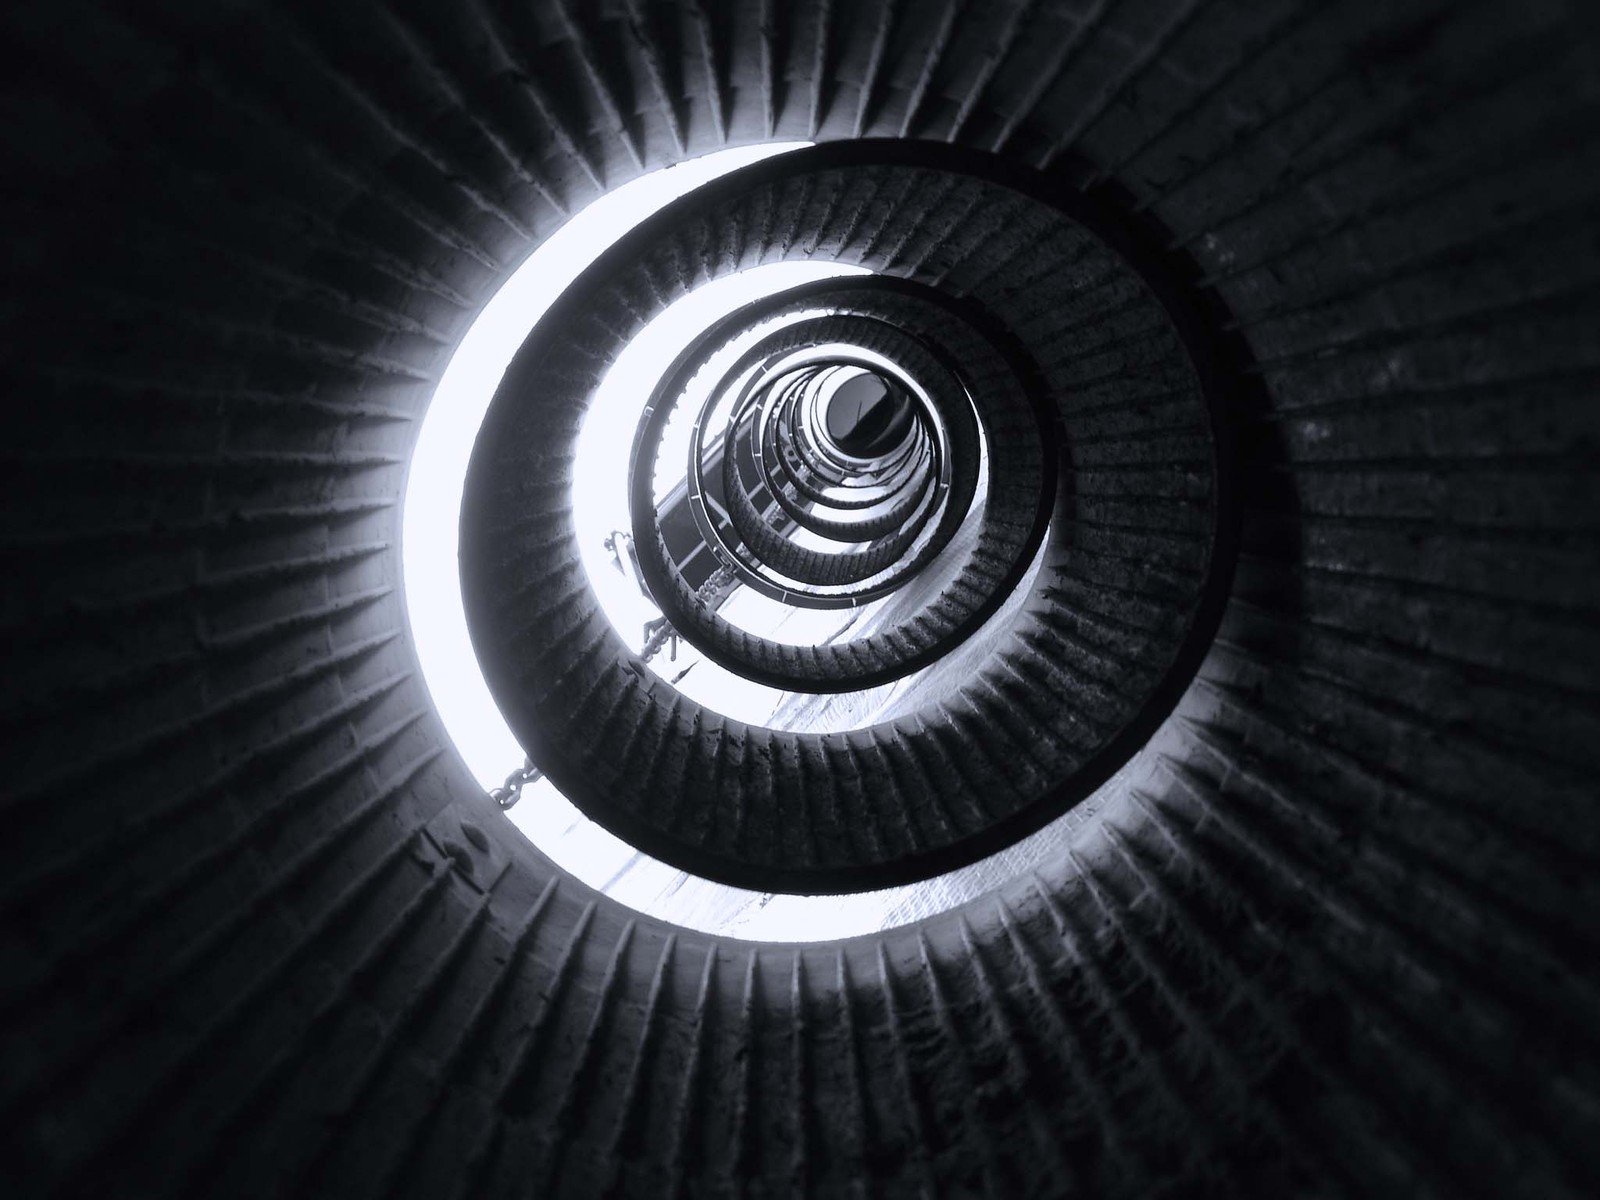 a black and white image of some spirals